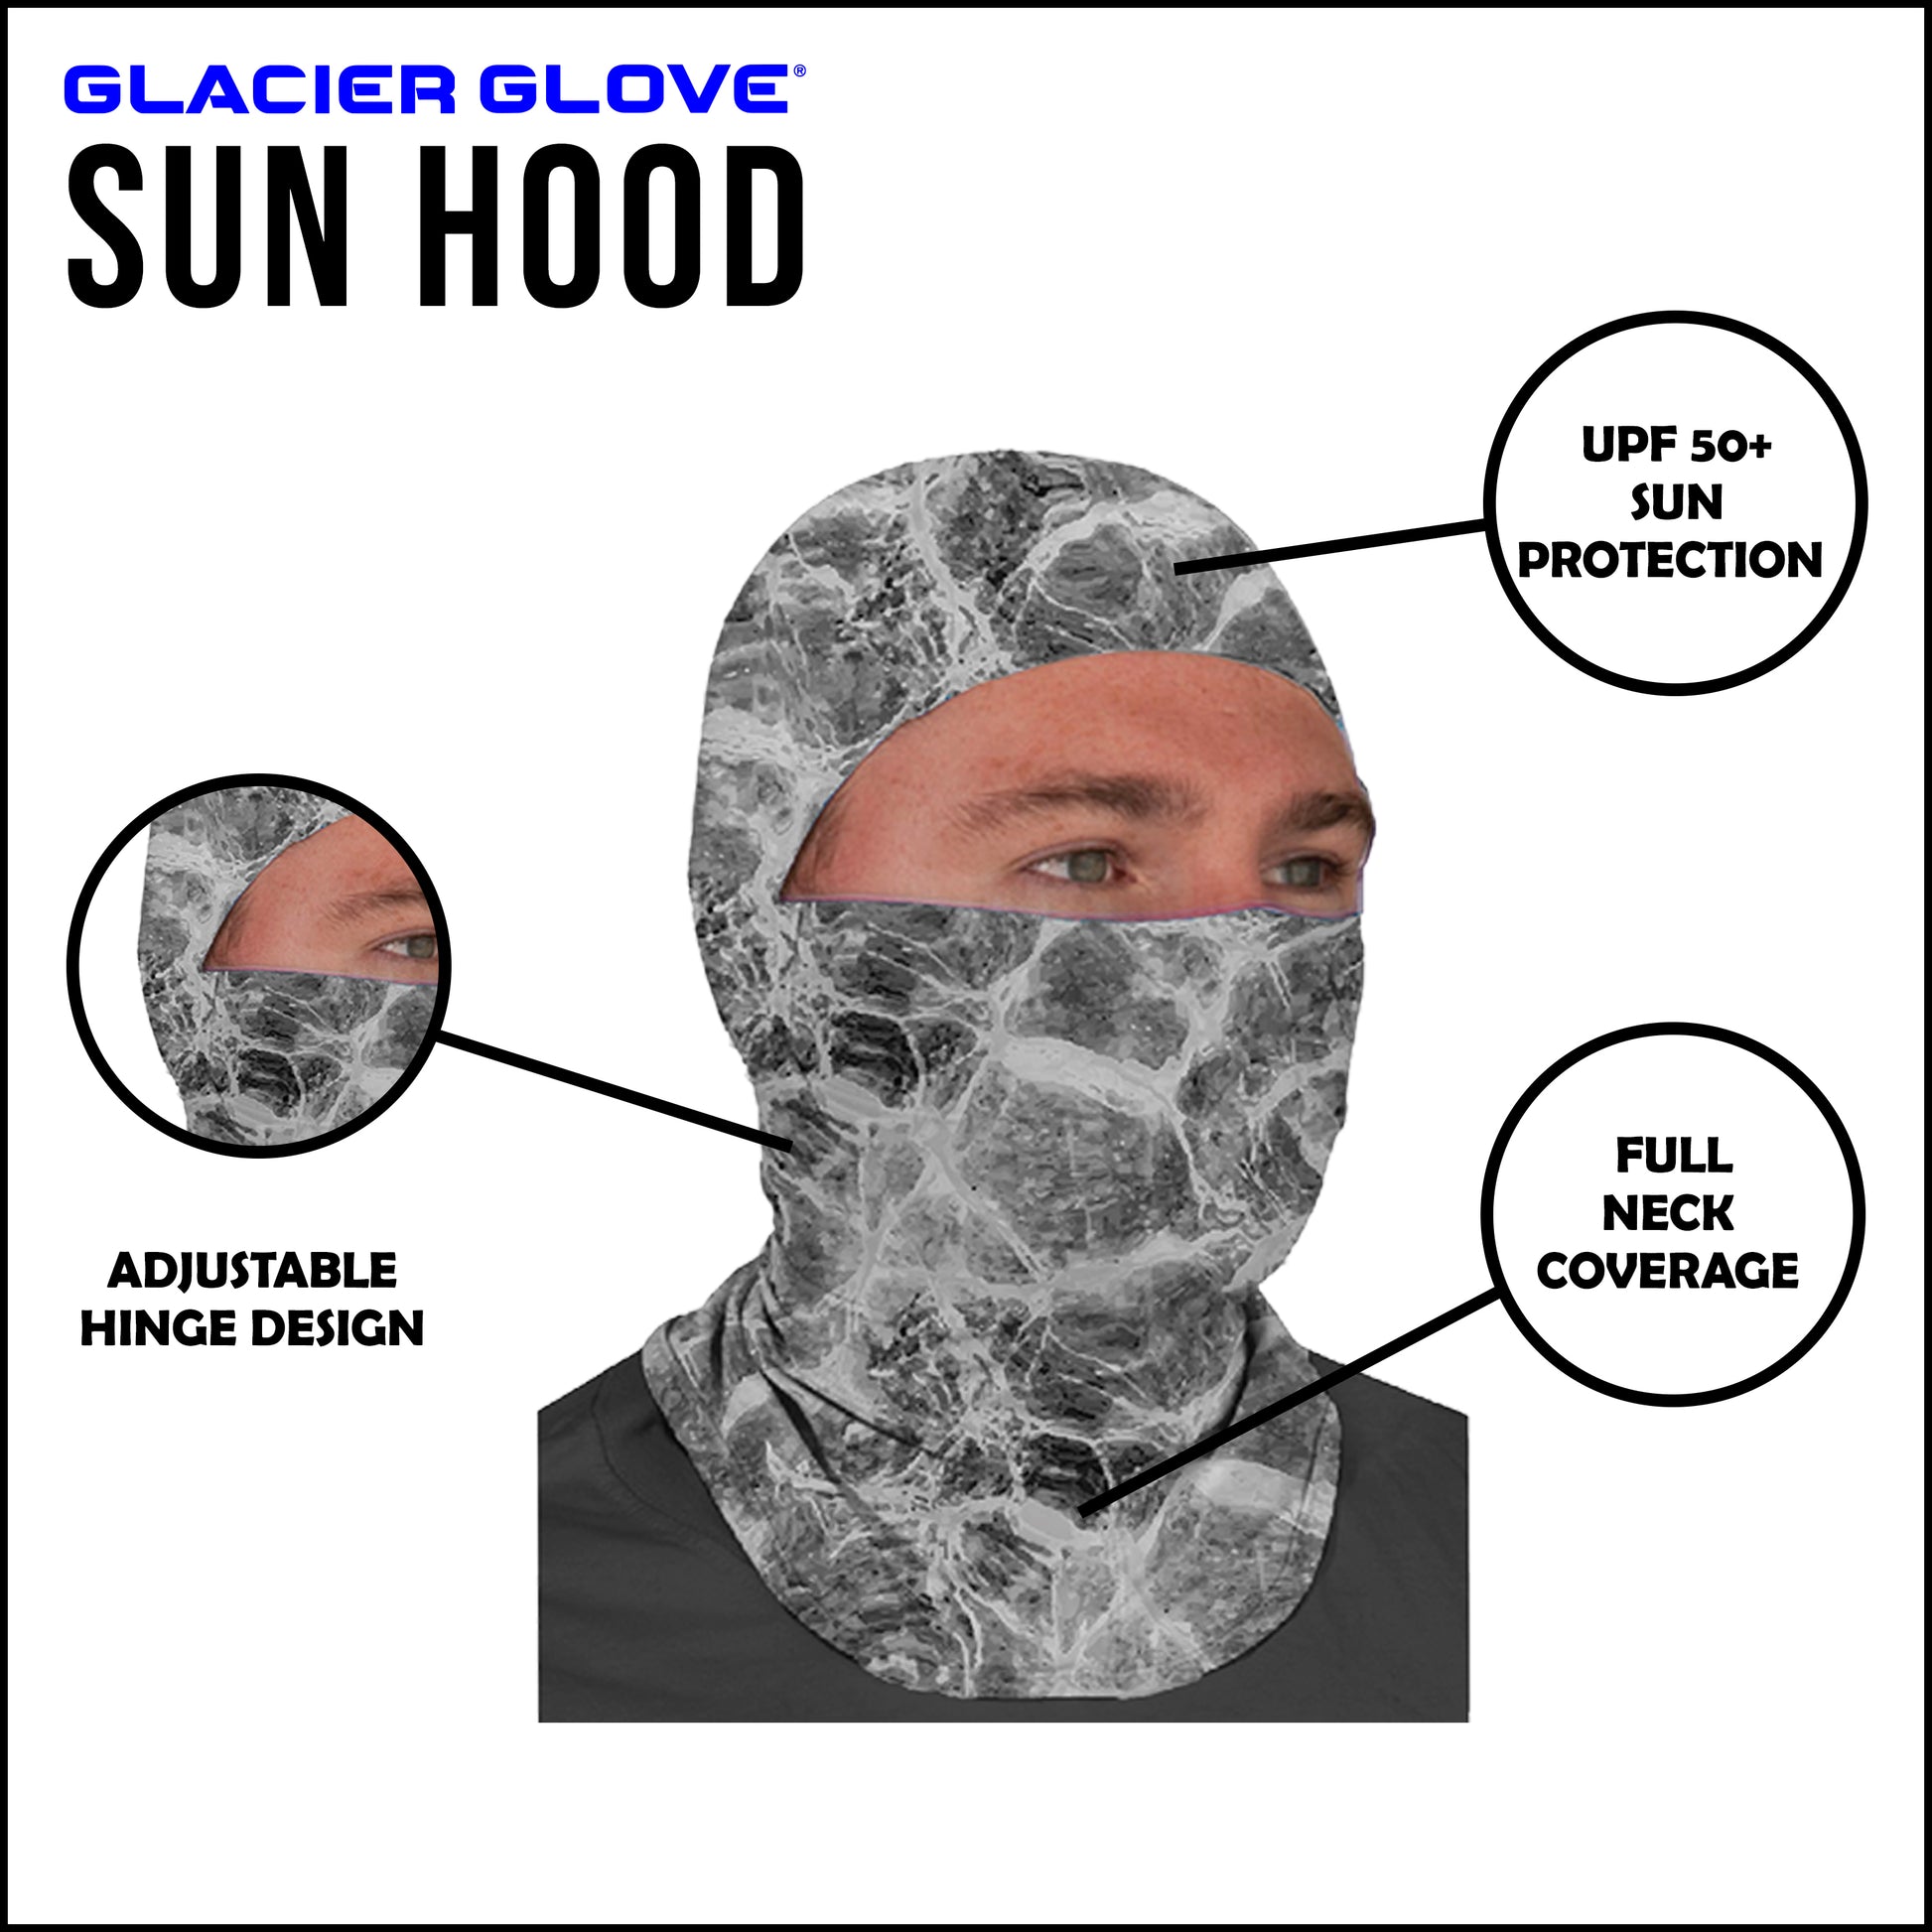 The Sun Hood is a great choice for year-round sun protection. This UPF 50+ sun hood provides full coverage and helps protect against the sun’s harmful rays to keep you outdoors longer.